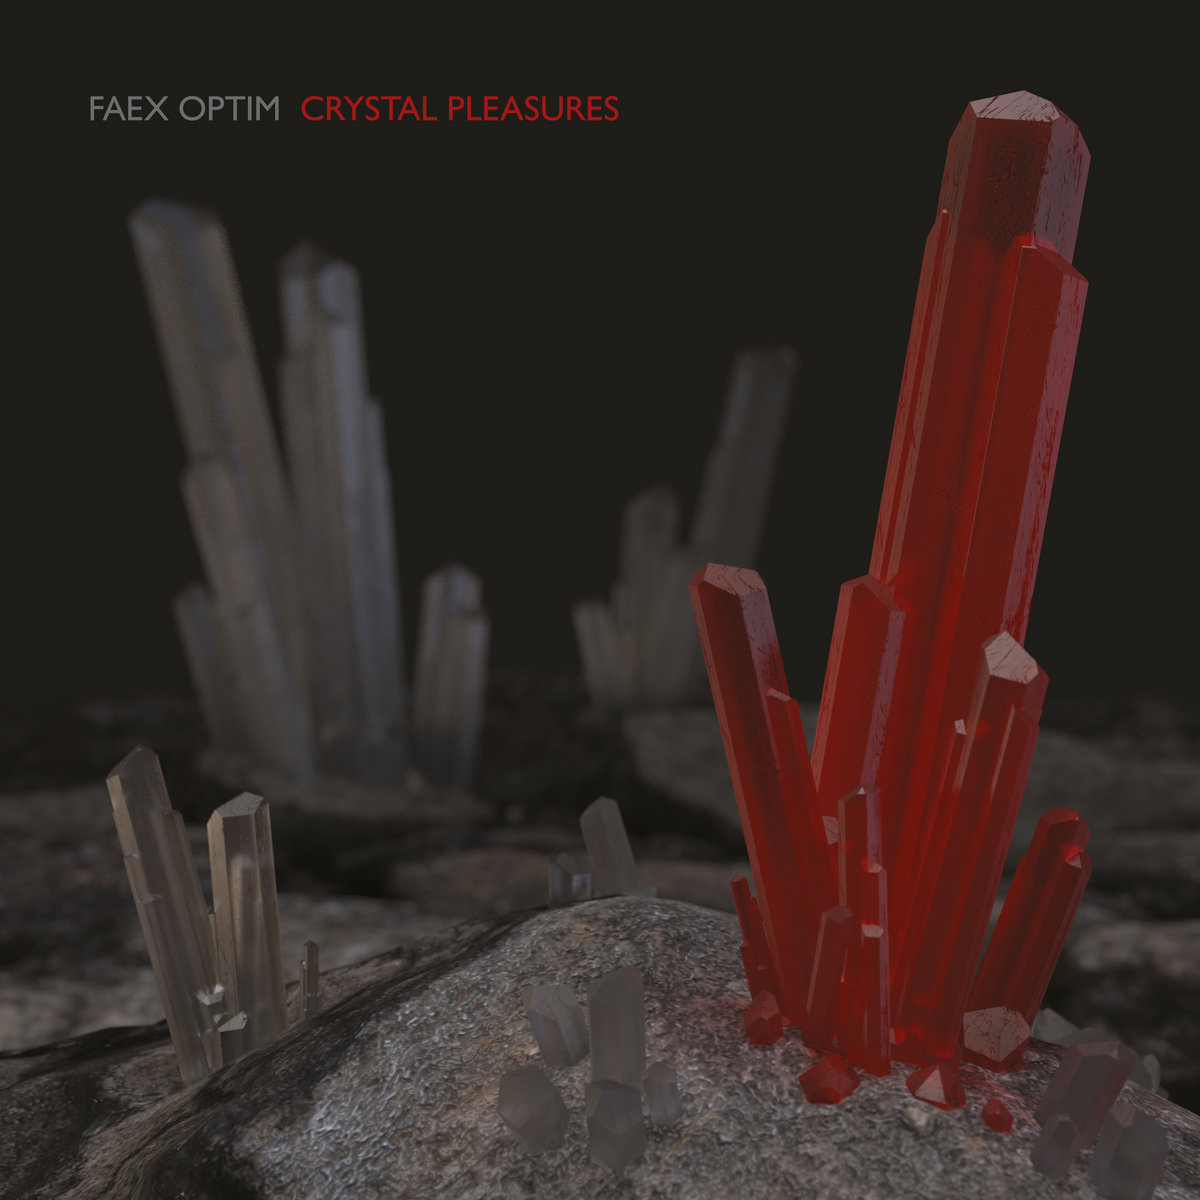 Album Review – Crystal Pleasures by @faexoptim 'There’s a journey through the night here, a memory bubbling up transformed; a sense that the mind is trying to guide us to some unseen conclusion.' Read the full review by @CMQueen in this month's SNACK 💛 snackmag.co.uk/album-review-c…